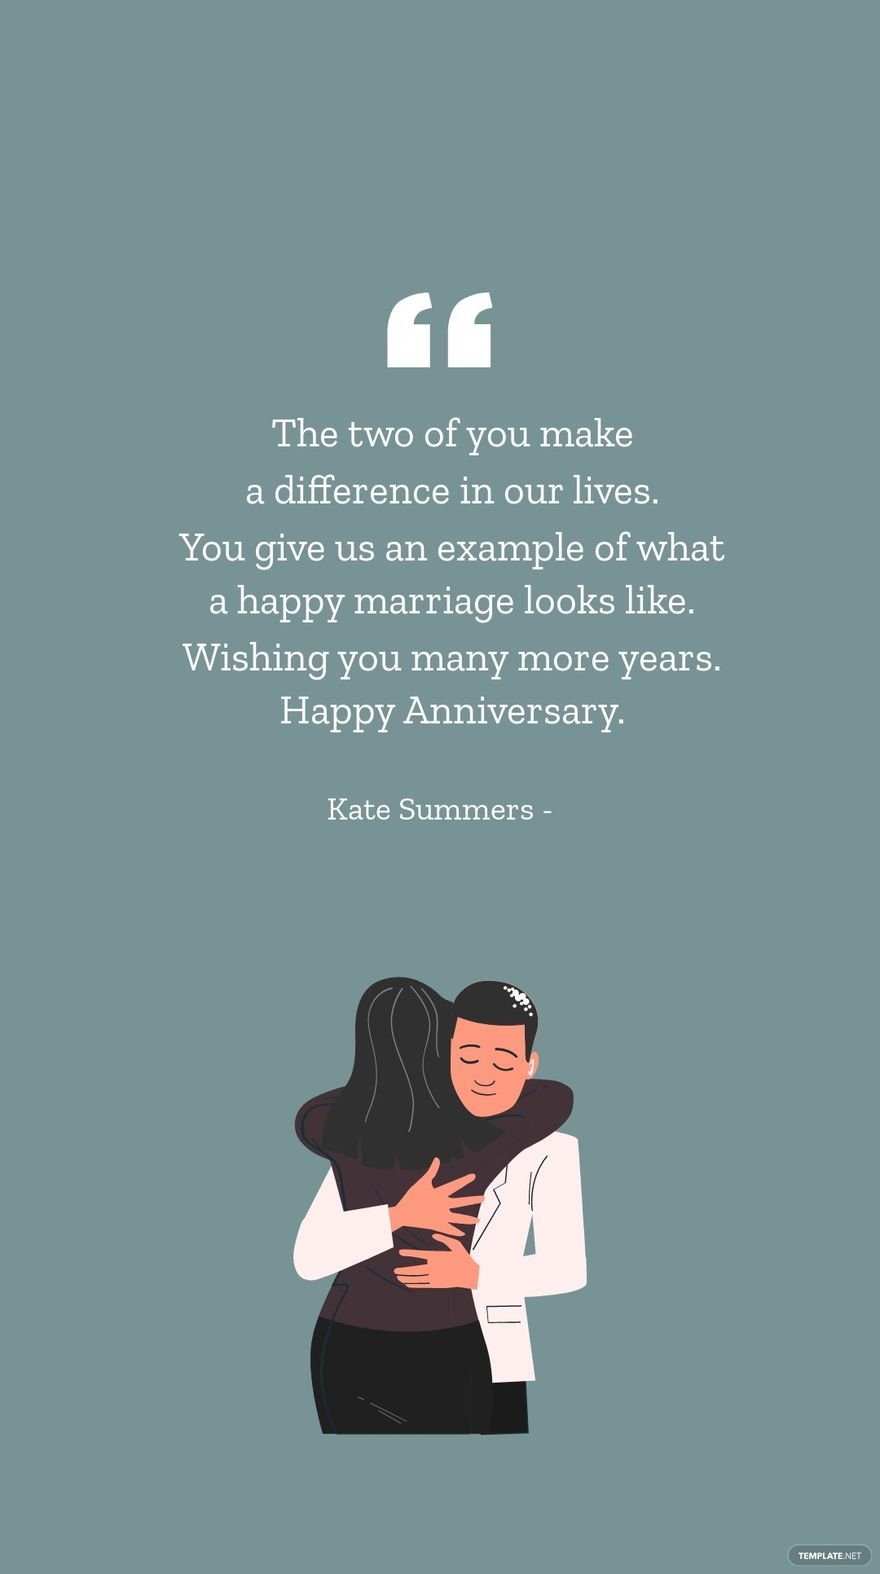 Free Kate Summers - The two of you make a difference in our lives. You give us an example of what a happy marriage looks like. Wishing you many more years. Happy Anniversary.